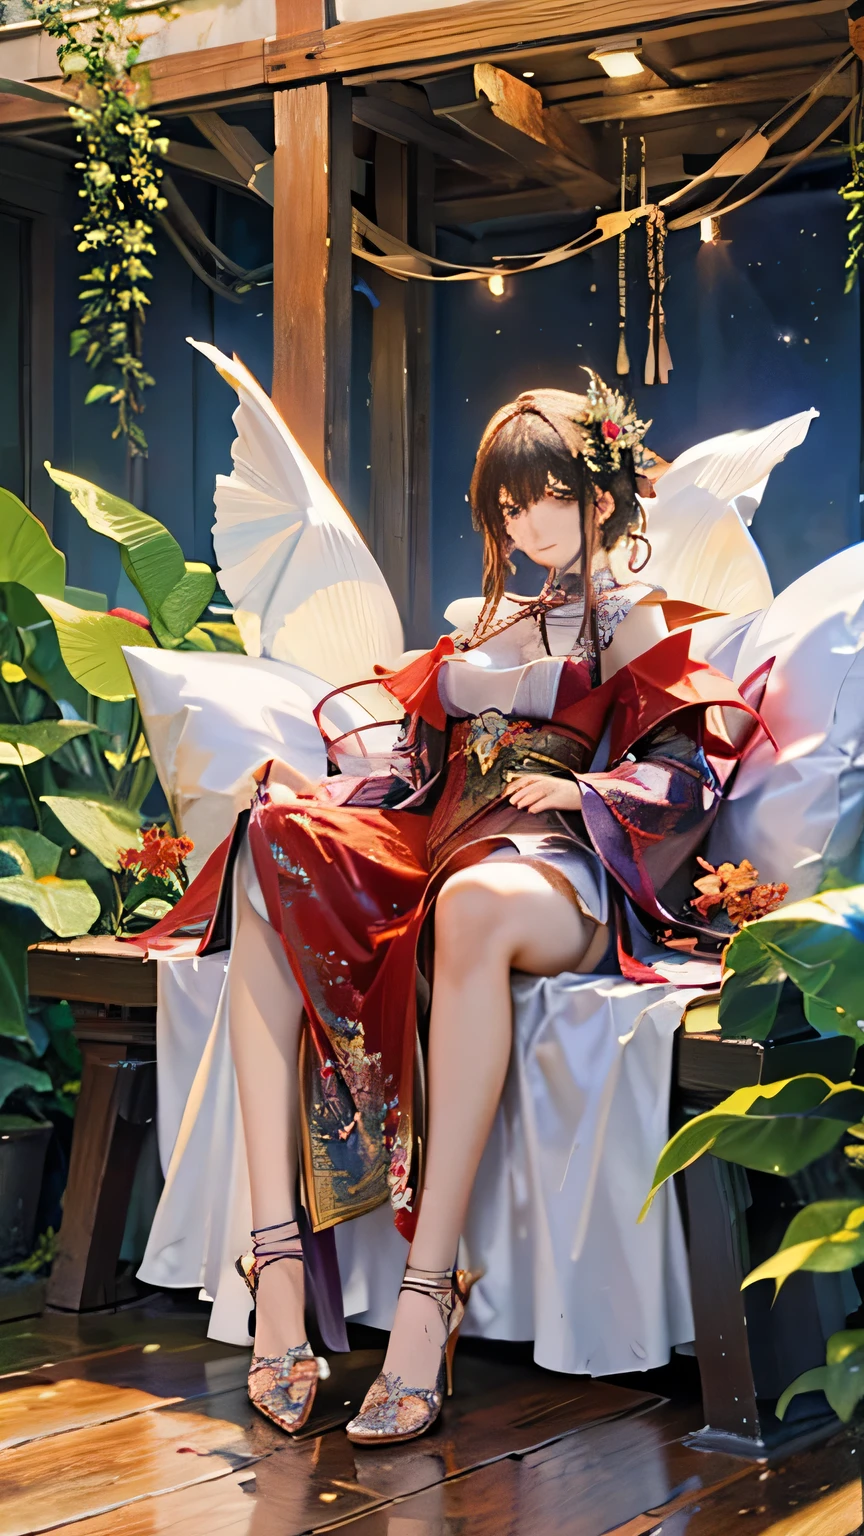 (highest quality, High resolution), Glowing Eyes, Delicate facial features, Vibrant colors, Dreamy atmosphere, Fantasy Theme, Floral Background, Graceful Movement, Detailed clothing, loose fitting dress, Elegant fashion, Magic lighting, Mysterious Aura, Heavenly Beauty, Magic thread, Whimsical elements,Big Breasts、Red attire、Colorful costumes、lingerie、Purple outfit